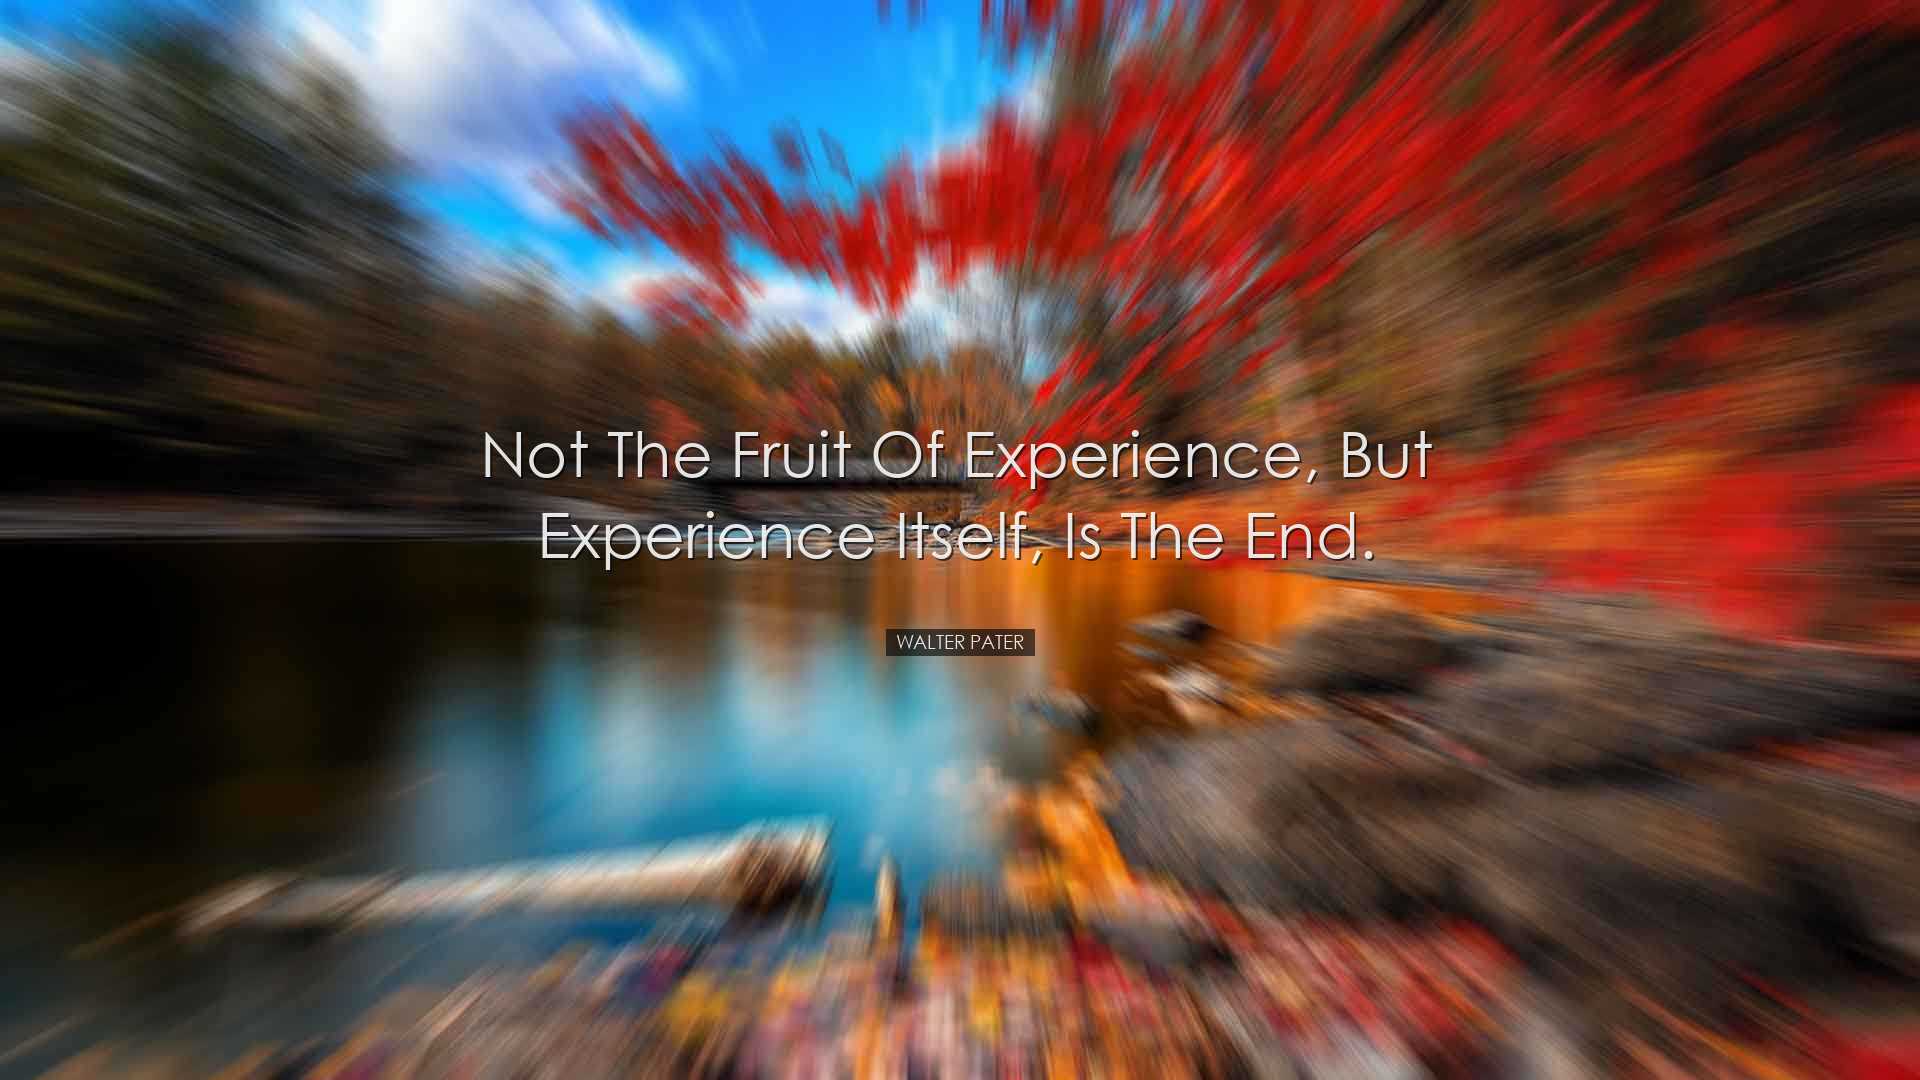 Not the fruit of experience, but experience itself, is the end. -